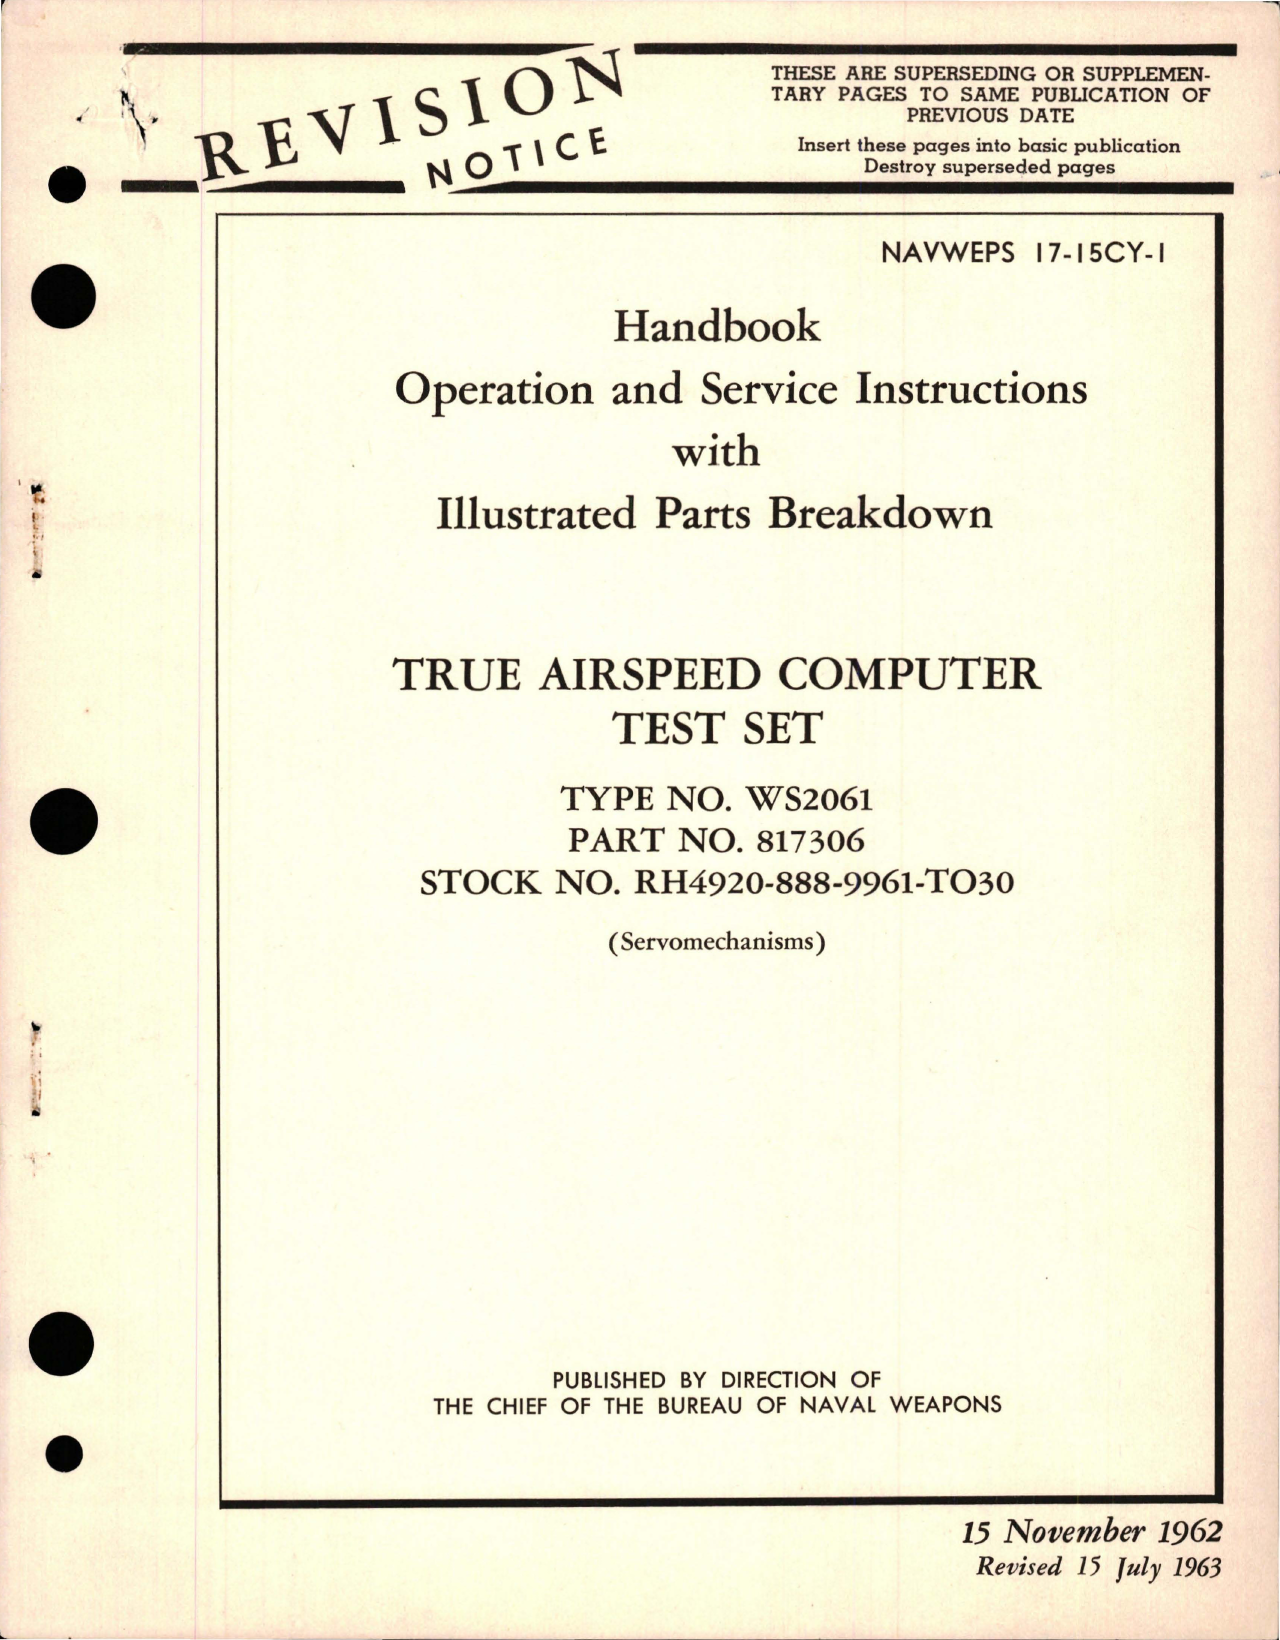 Sample page 1 from AirCorps Library document: Operation, Service Instructions with Illustrated Parts for True Airspeed Computer Test Set - Type WS2061, Part 817306